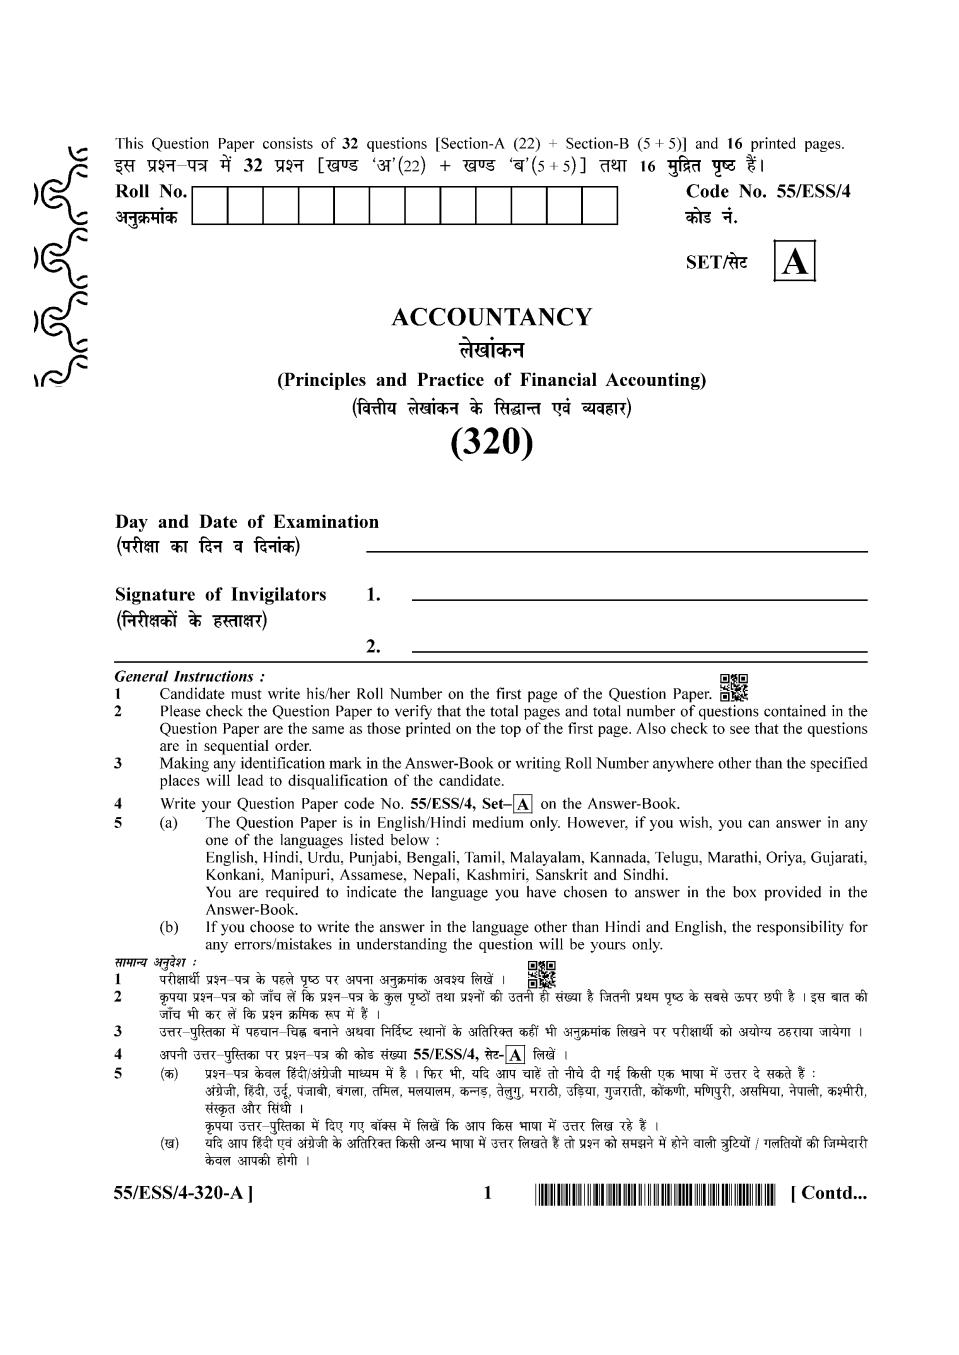 NIOS Class 12 Question Paper Oct 2017 - Accountancy - Page 1